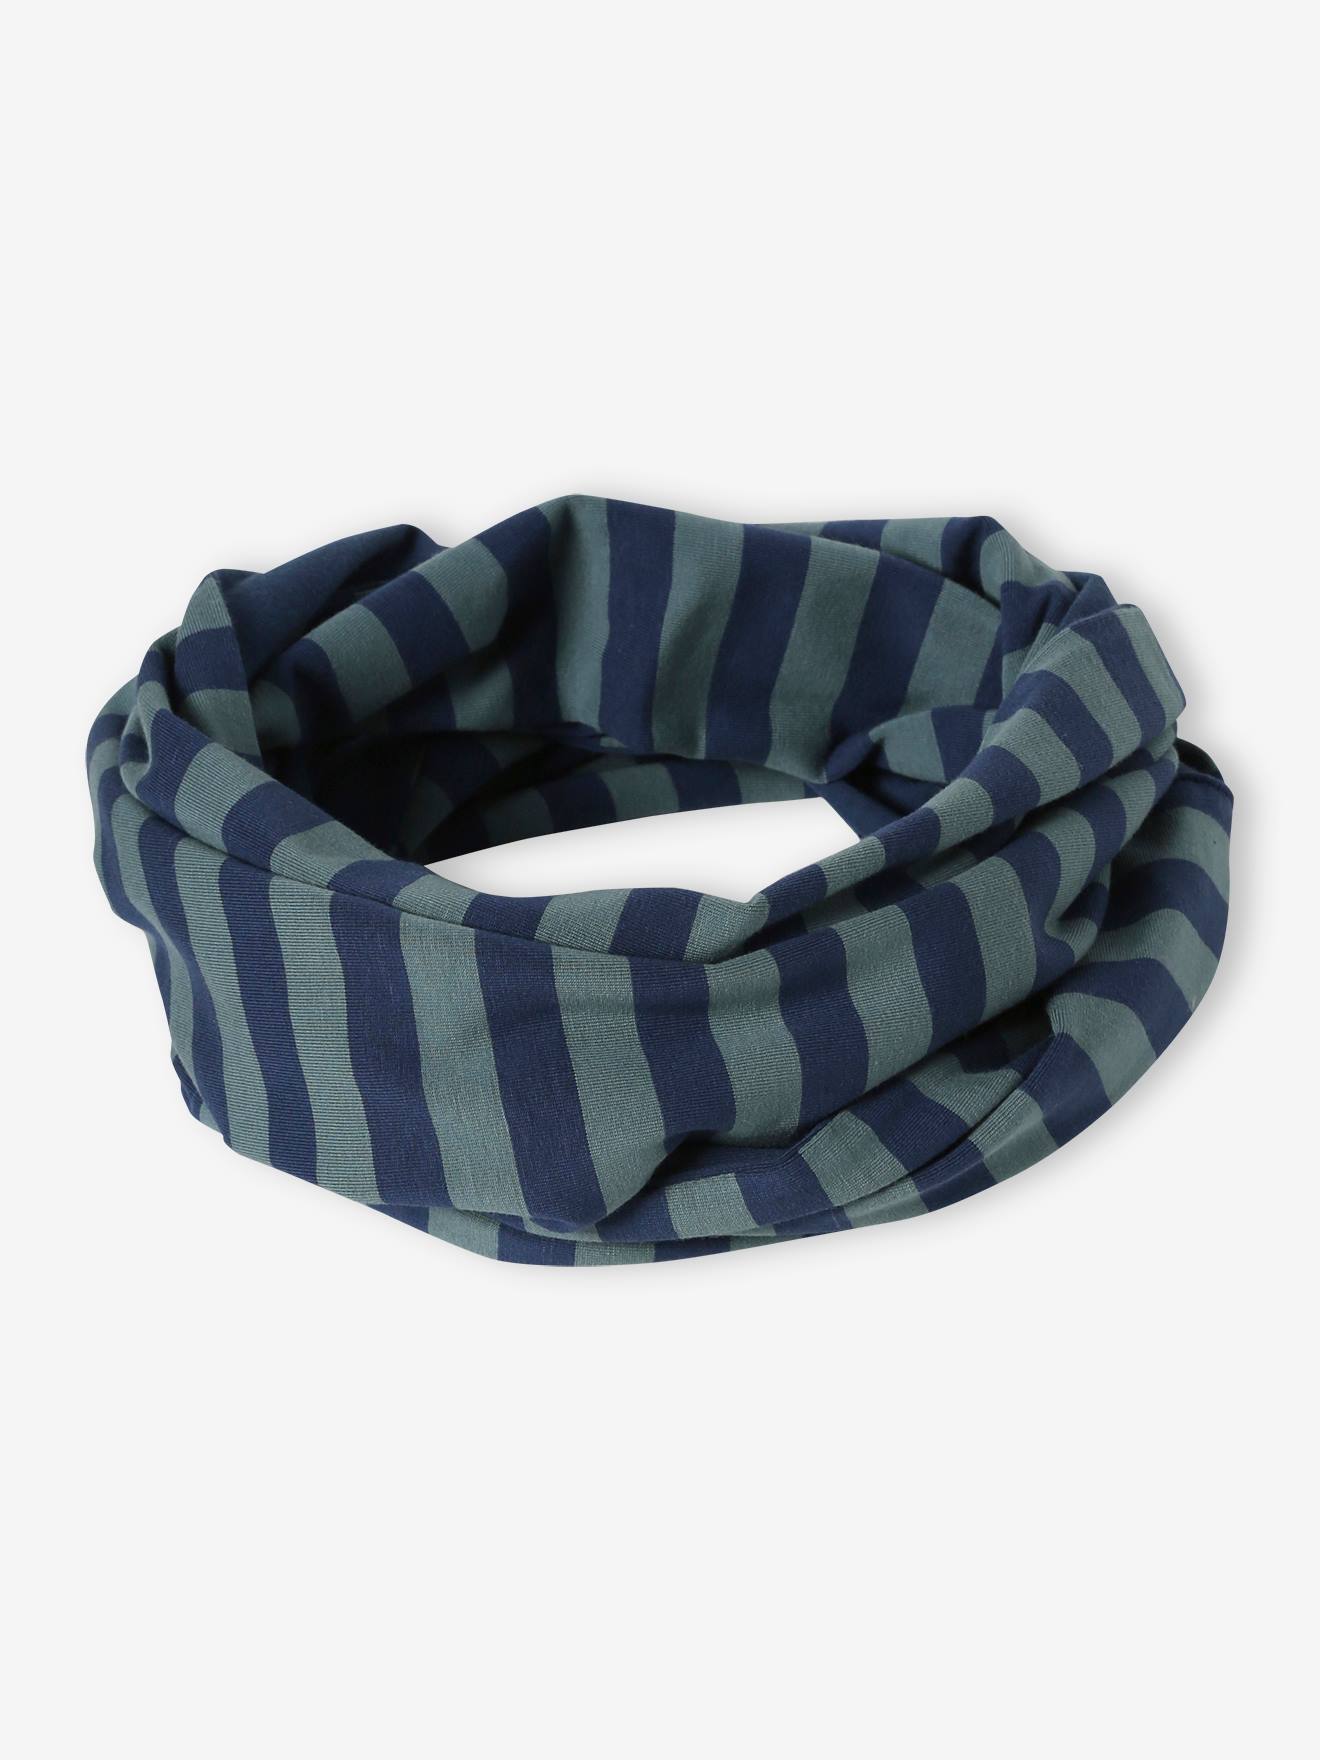 Reversible Infinity Scarf for Boys, Rock/Marl navy blue